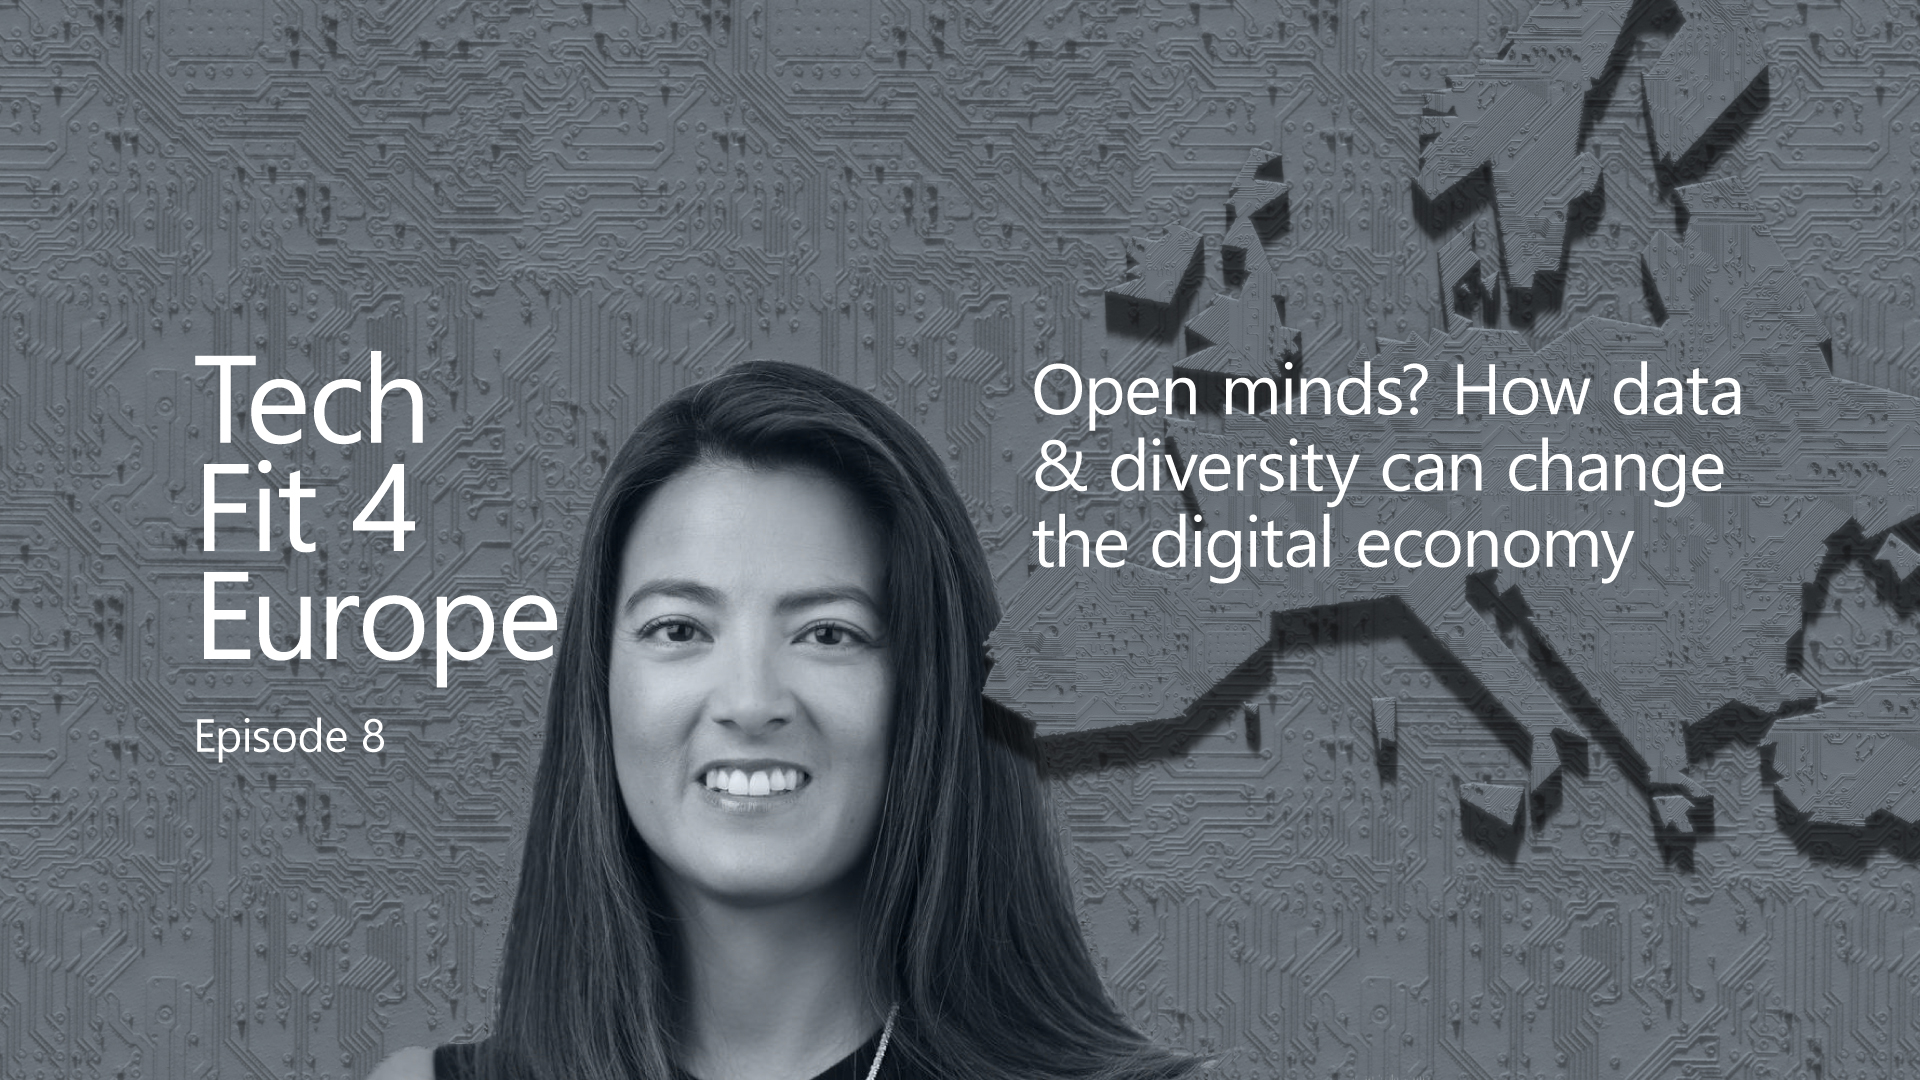 Open minds? How data & diversity can change the digital economy